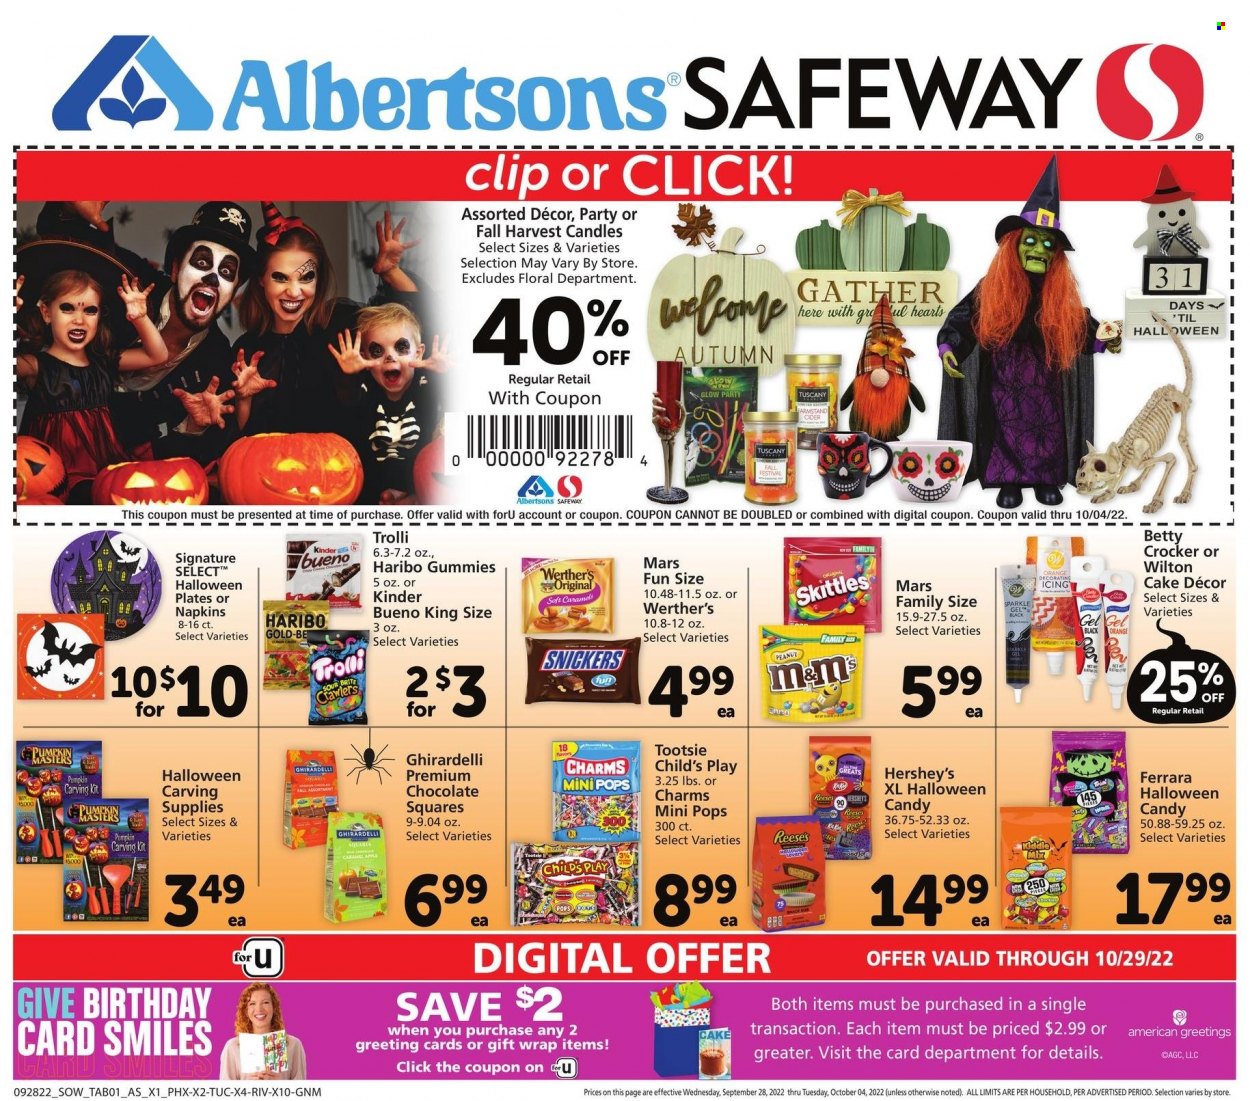 thumbnail - Safeway Flyer - 09/28/2022 - 10/04/2022 - Sales products - cake, pumpkin, oranges, Reese's, Hershey's, chocolate, Trolli, Haribo, Snickers, Mars, M&M's, Kinder Bueno, Skittles, Ghirardelli, cider, napkins, Brite, plate, gift wrap, candle, Halloween. Page 5.